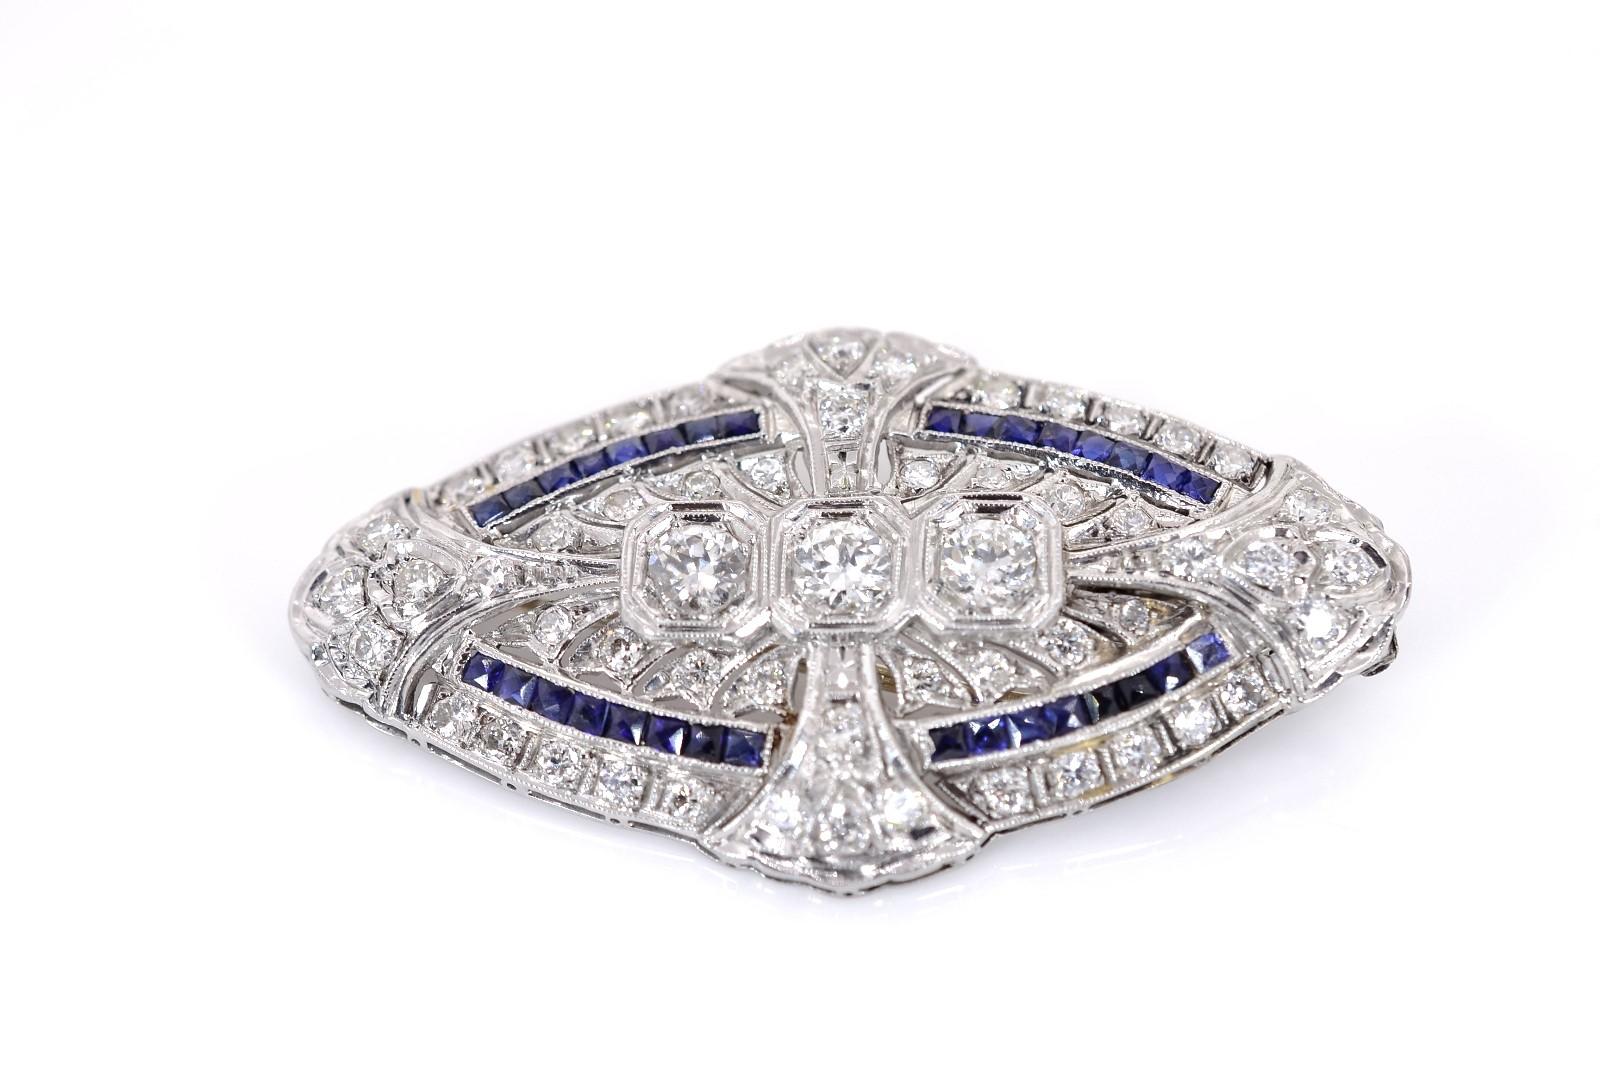 This gorgeous platinum set features a beautiful 1920's Art Deco pendant navette shape.  Set with approx. 2.75 carat of sparkling Old European cut Diamonds, and bright blue calibre French cut Ceylon Sapphire accents.  The pendant bail folds out of